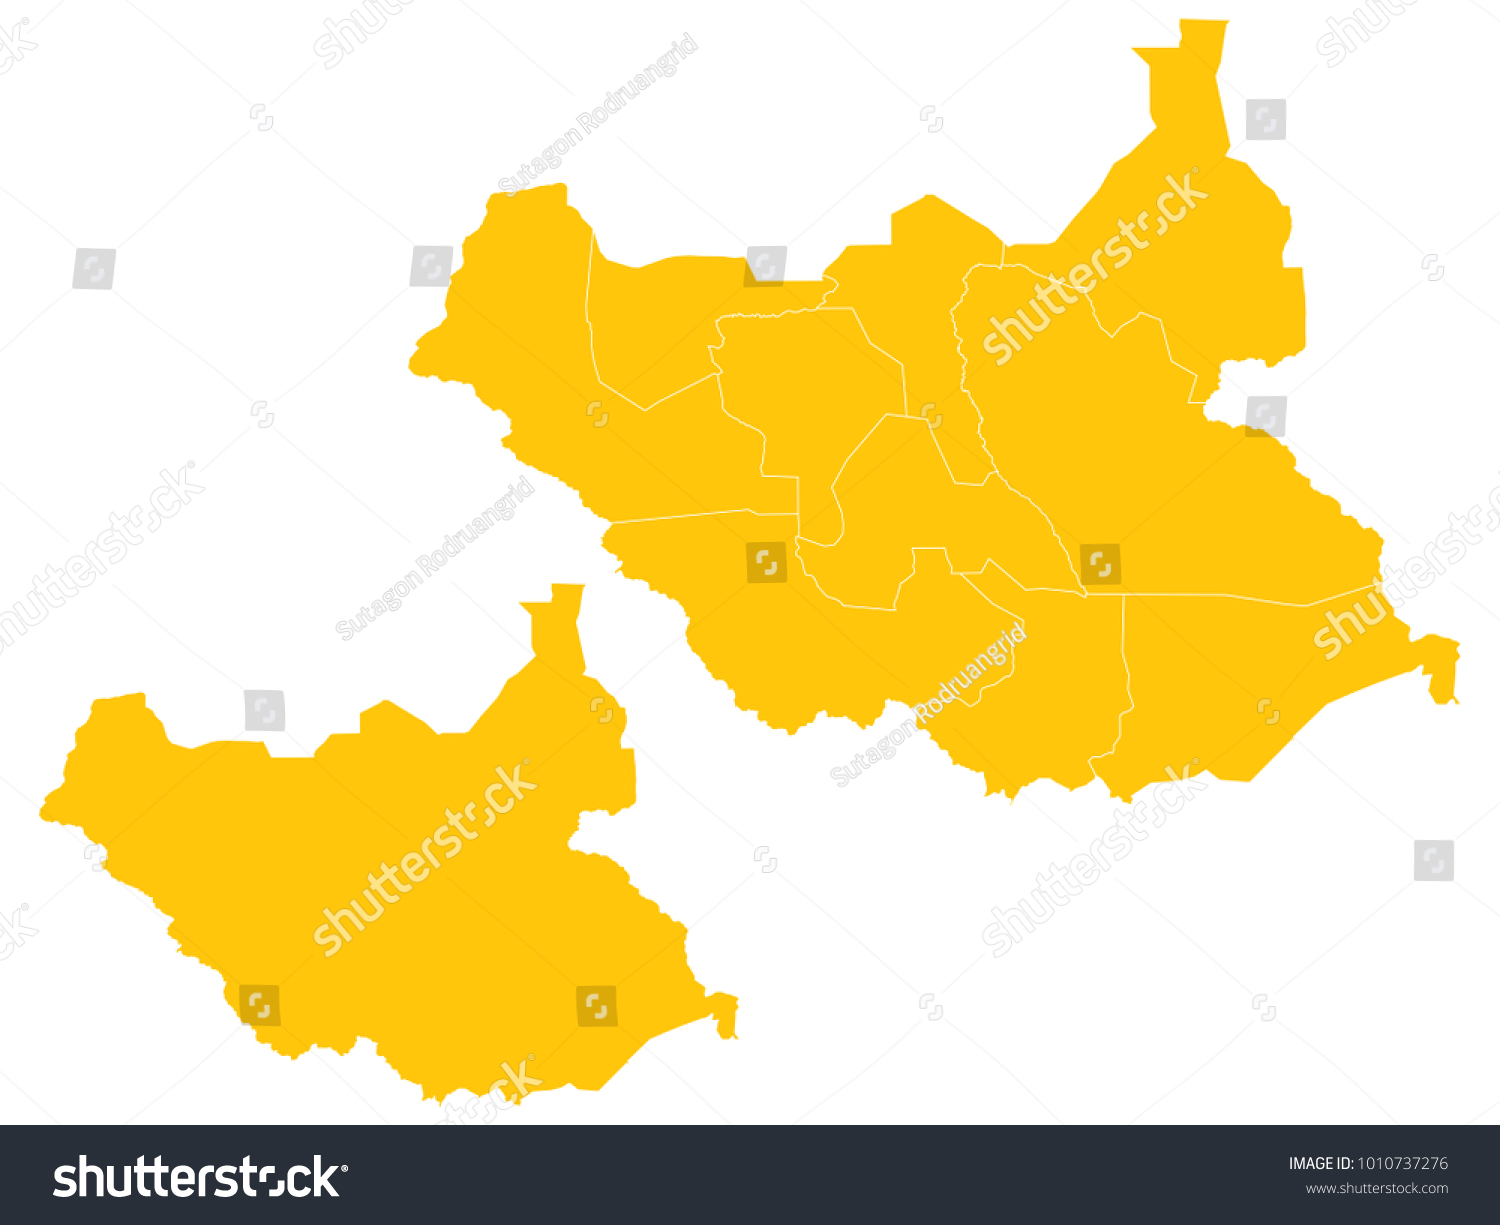 Couple Set Map,Yellow Map of South Sudan,Vector EPS10 #1010737276